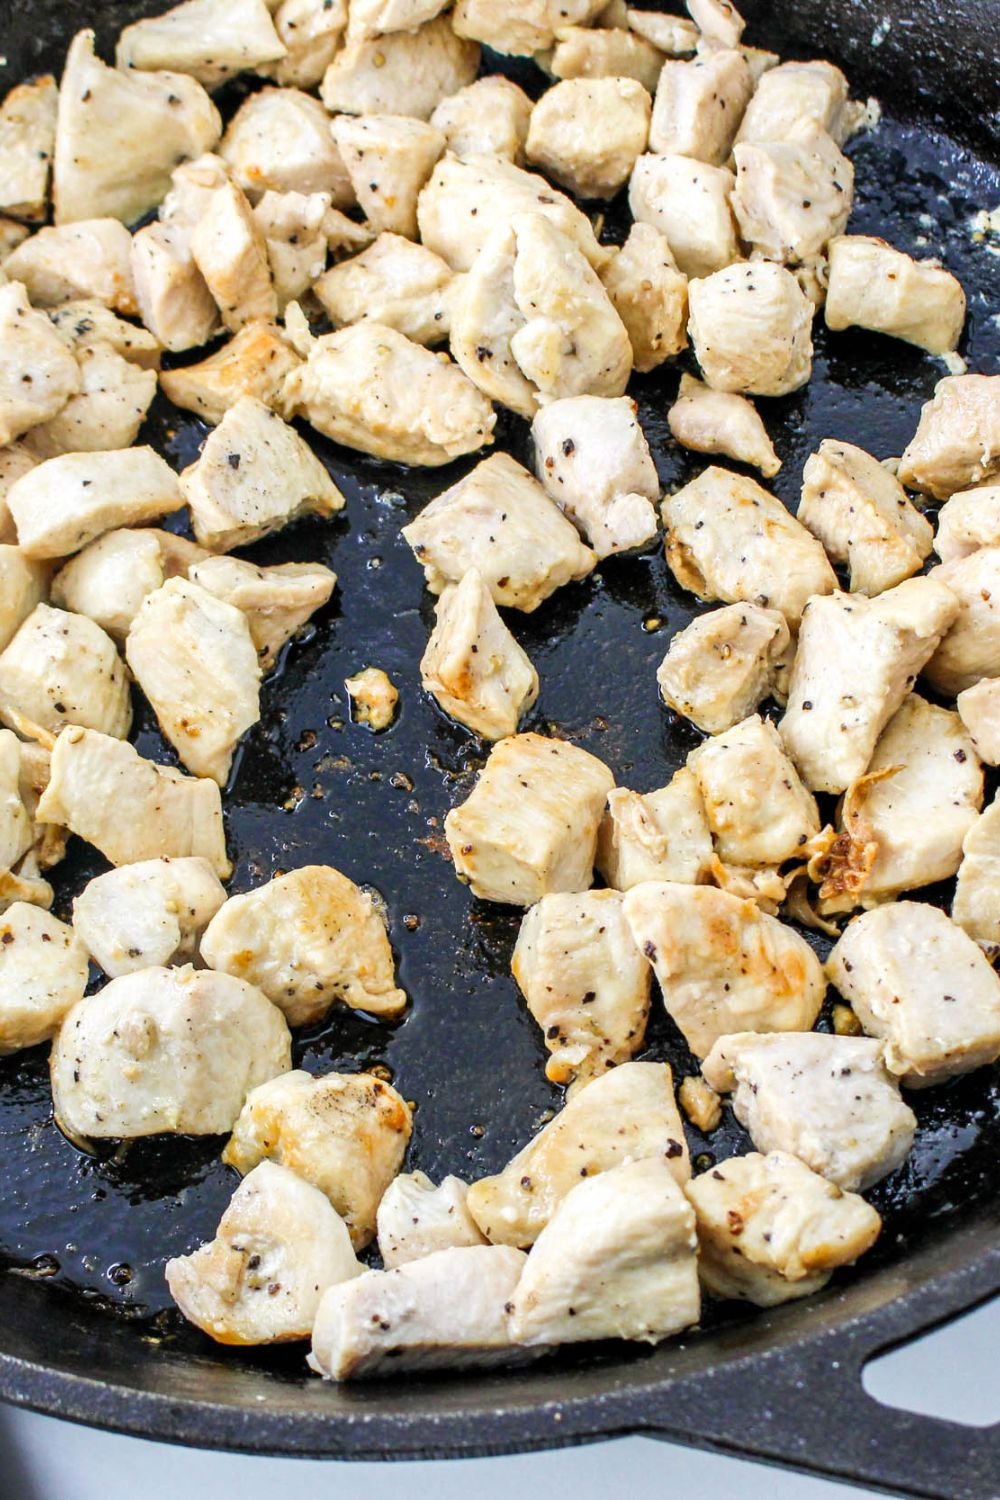 seared chicken in a skillet that is diced into bite size pieces